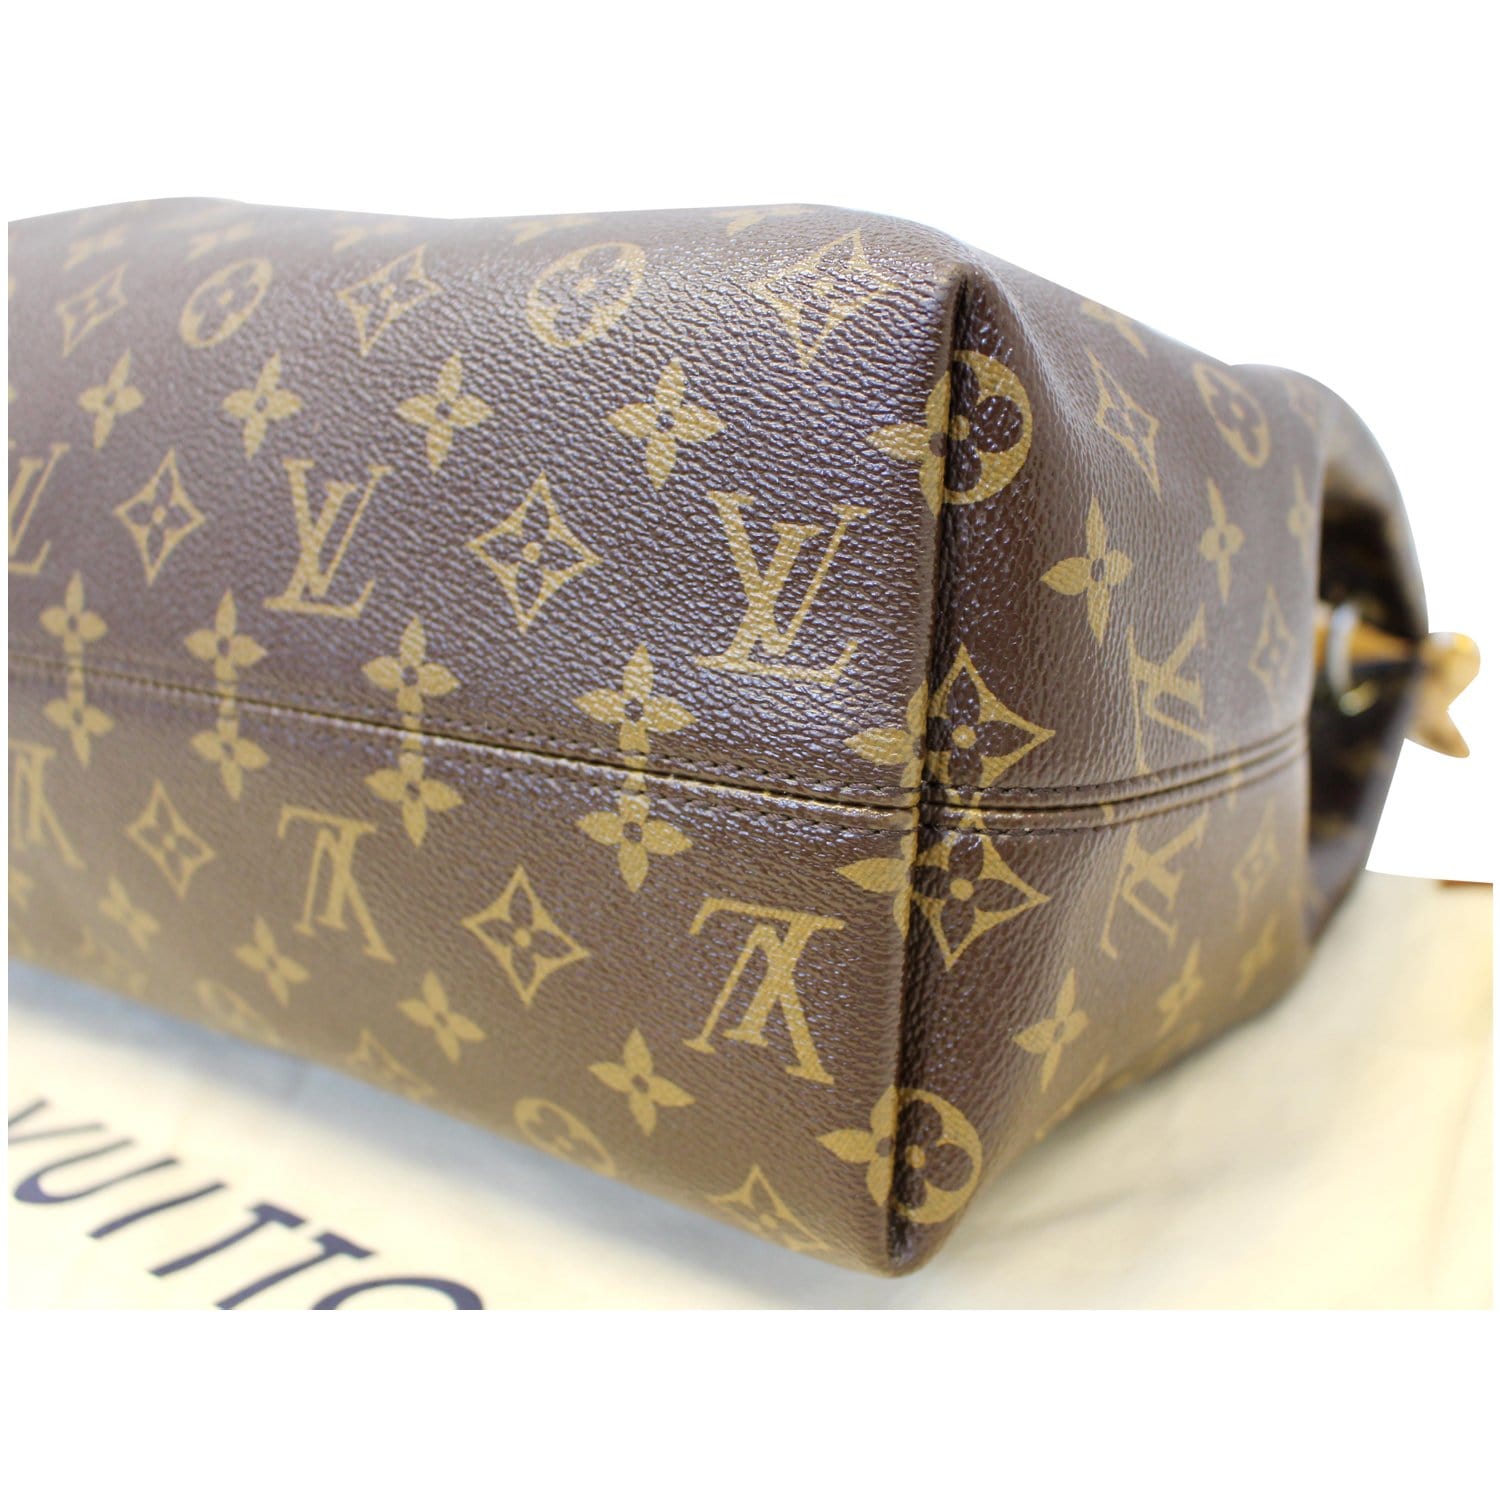 Louie Vuitton Artsy MM and Graceful MM side by side